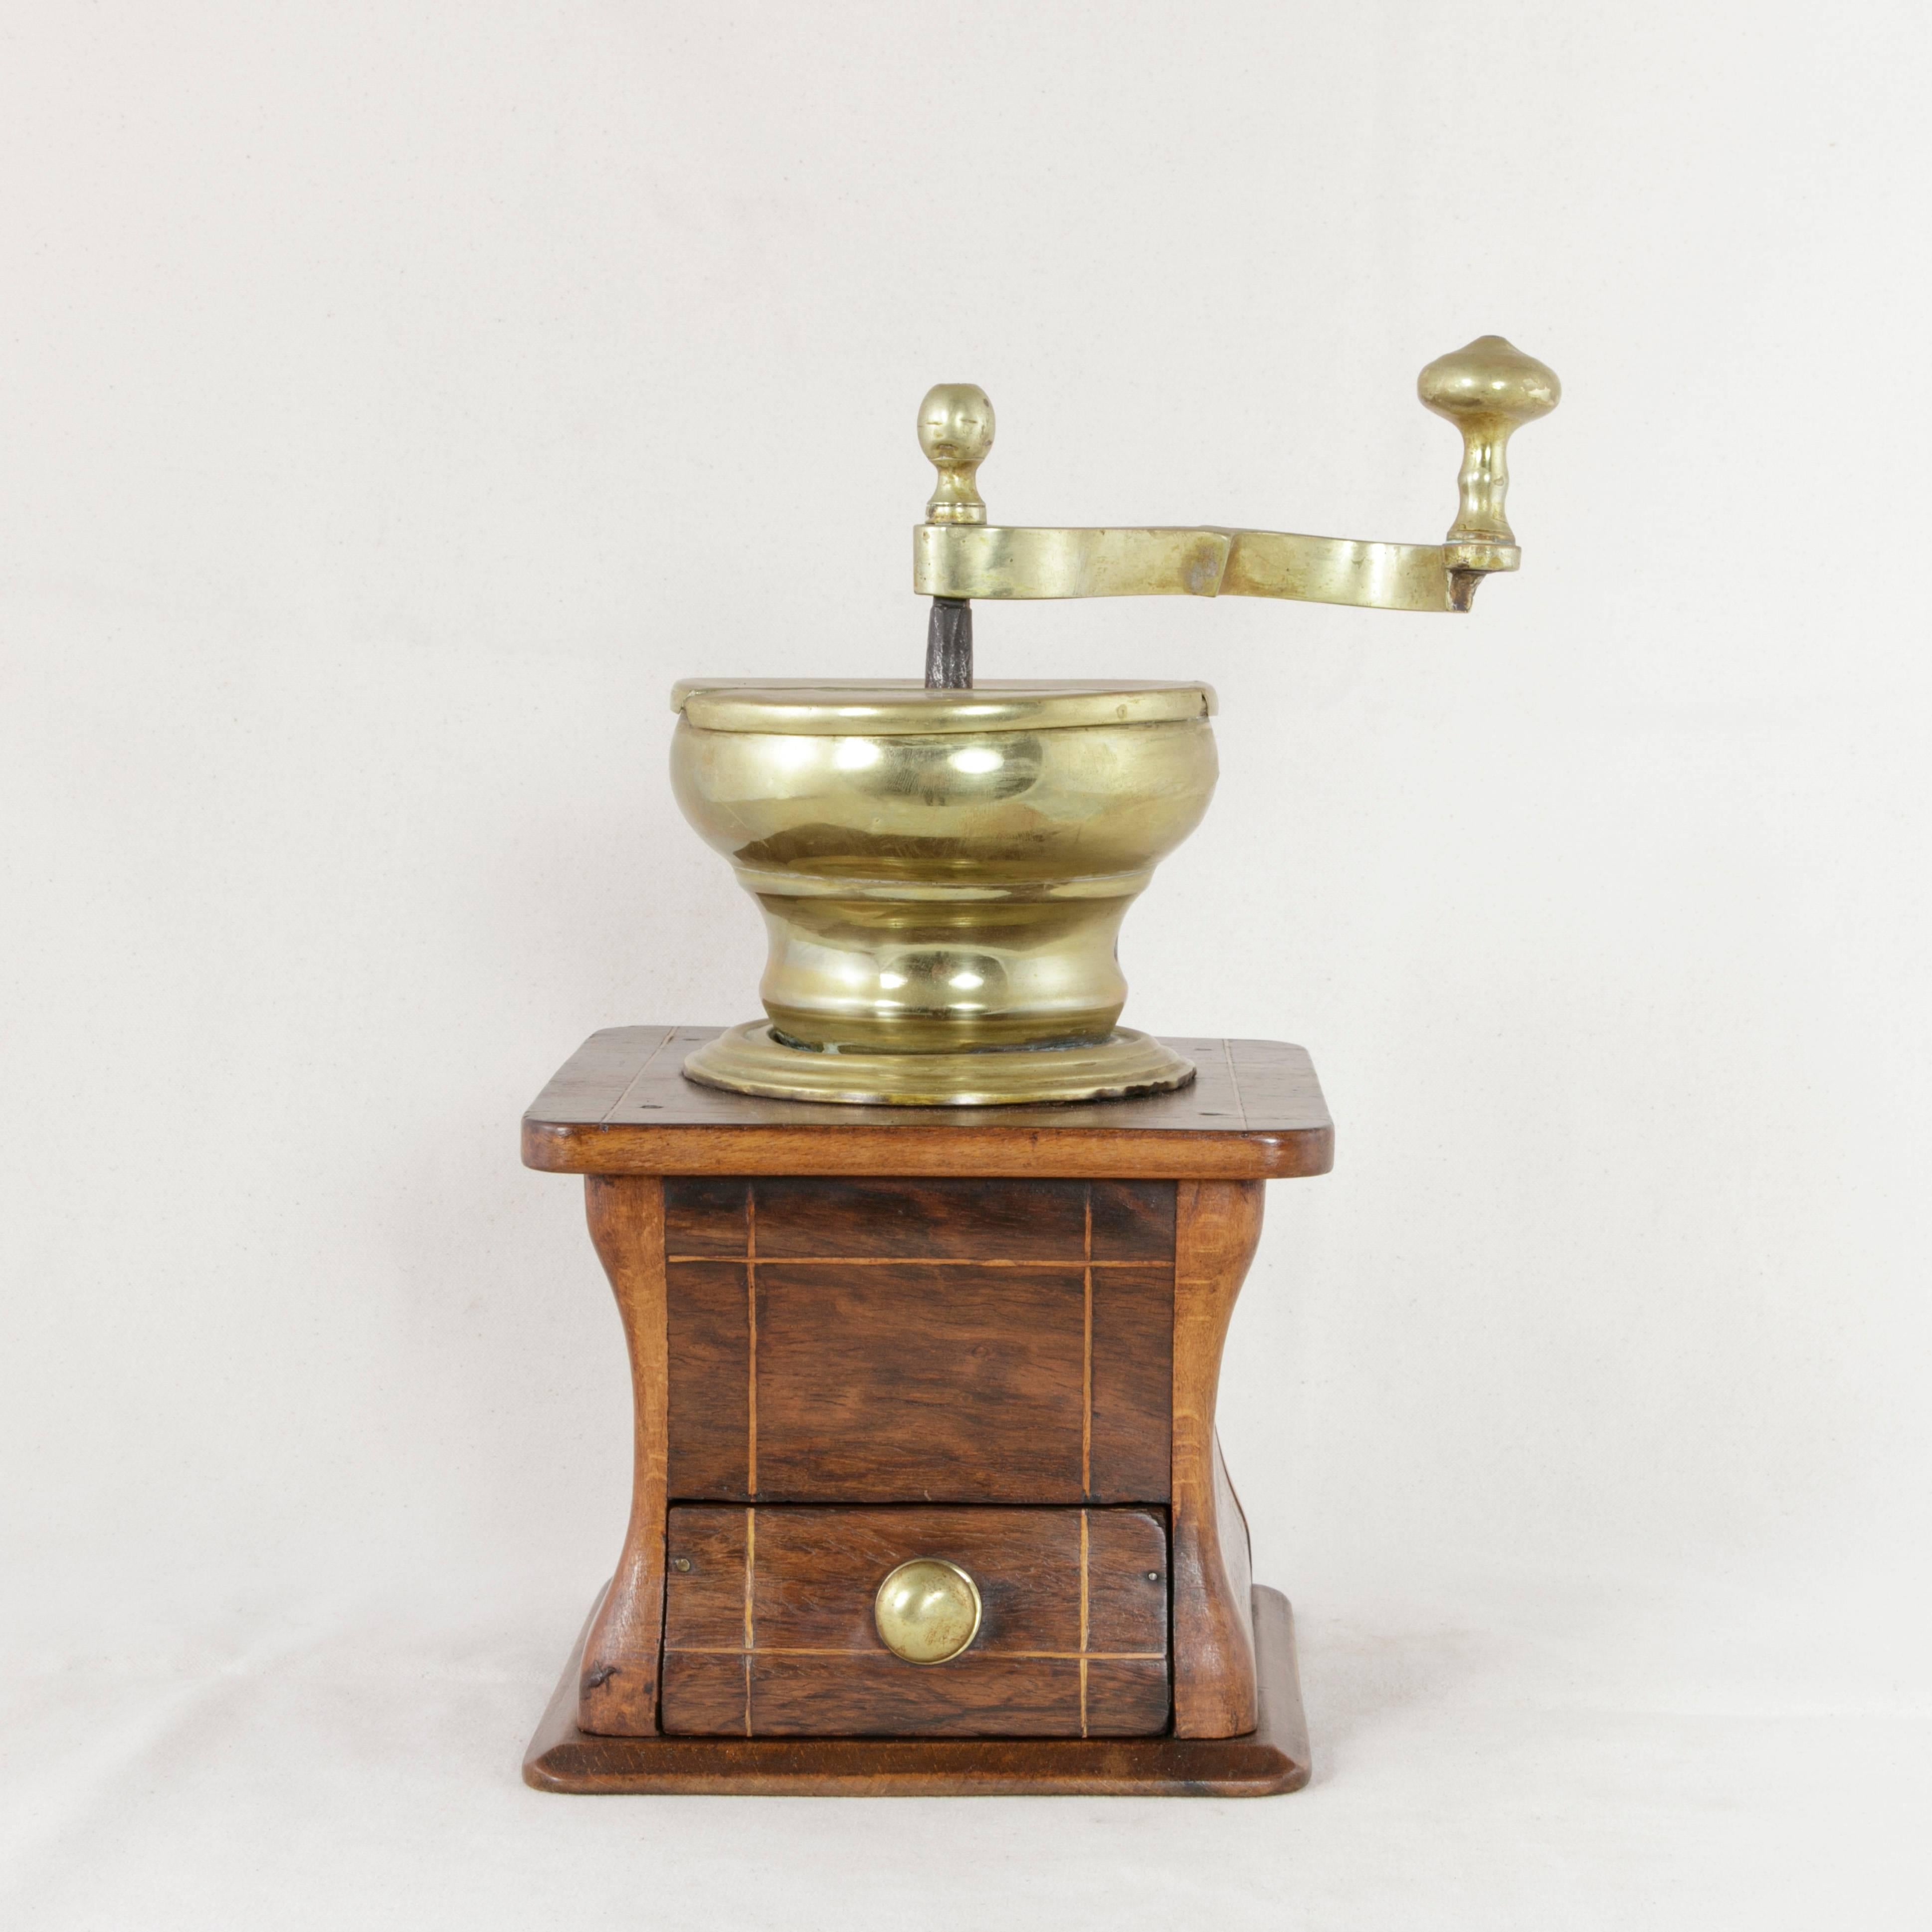 This early 19th century Dutch coffee grinder features a walnut base with fine lines of inlaid lemonwood. A single drawer with a brass knob allows for collection of the coffee grounds. The brass crank mechanism at the top has a hinged lid where